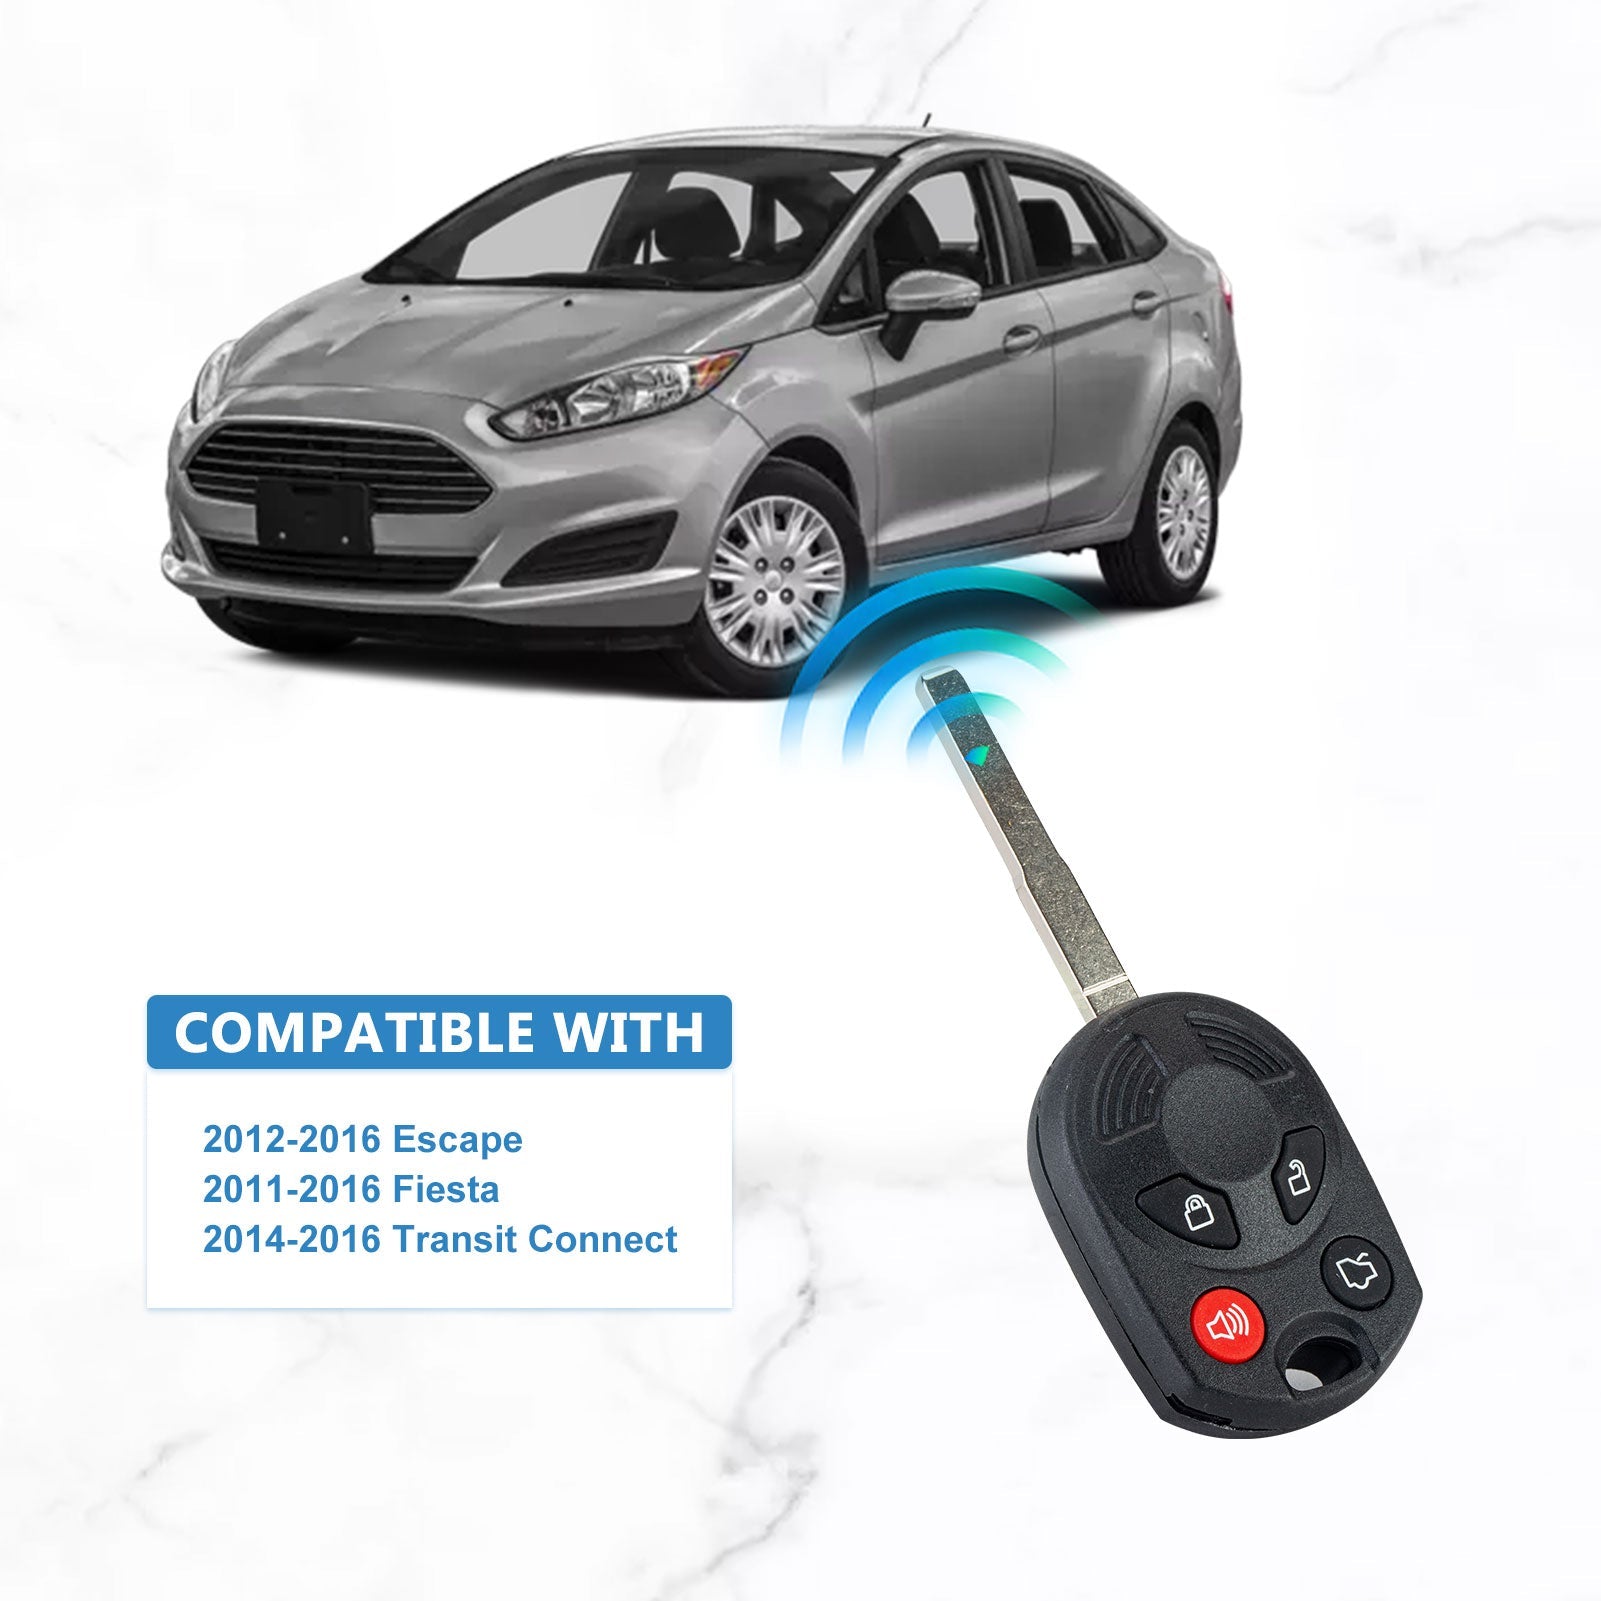 High Security Car Key 80 Bit Chip Replacement for 2012-2016 Escape/2011-2016 Fiesta OUCD6000022, 164-R8007 315MHZ  KR-F4SC-05